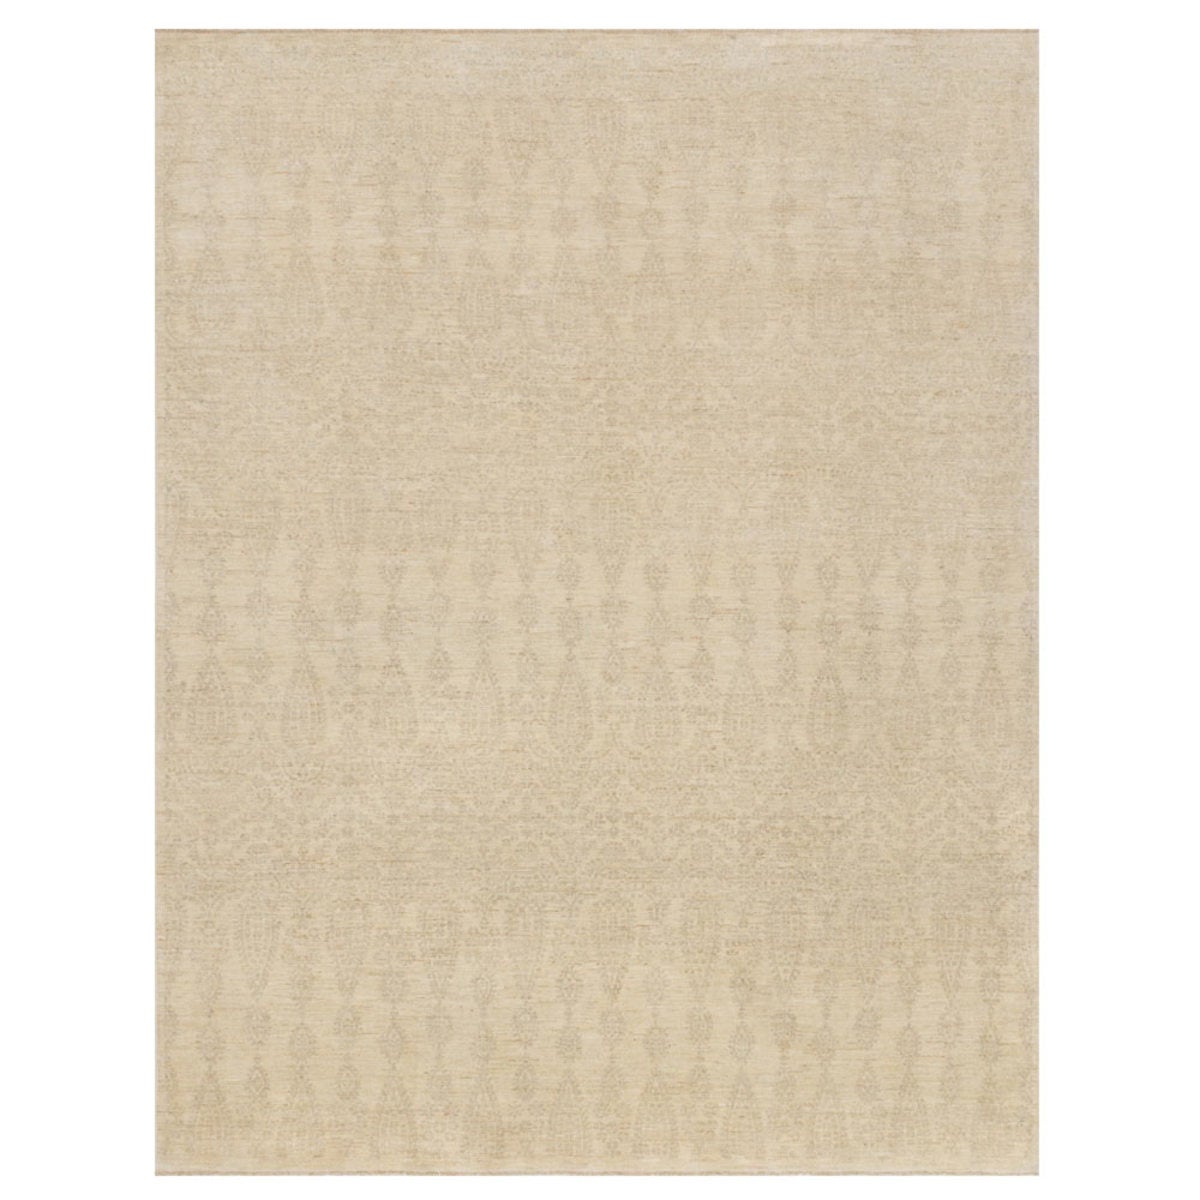 Loloi Essex Fading Arabesque Rug in Ivory - 5'6" x 8'6"  - Ivory